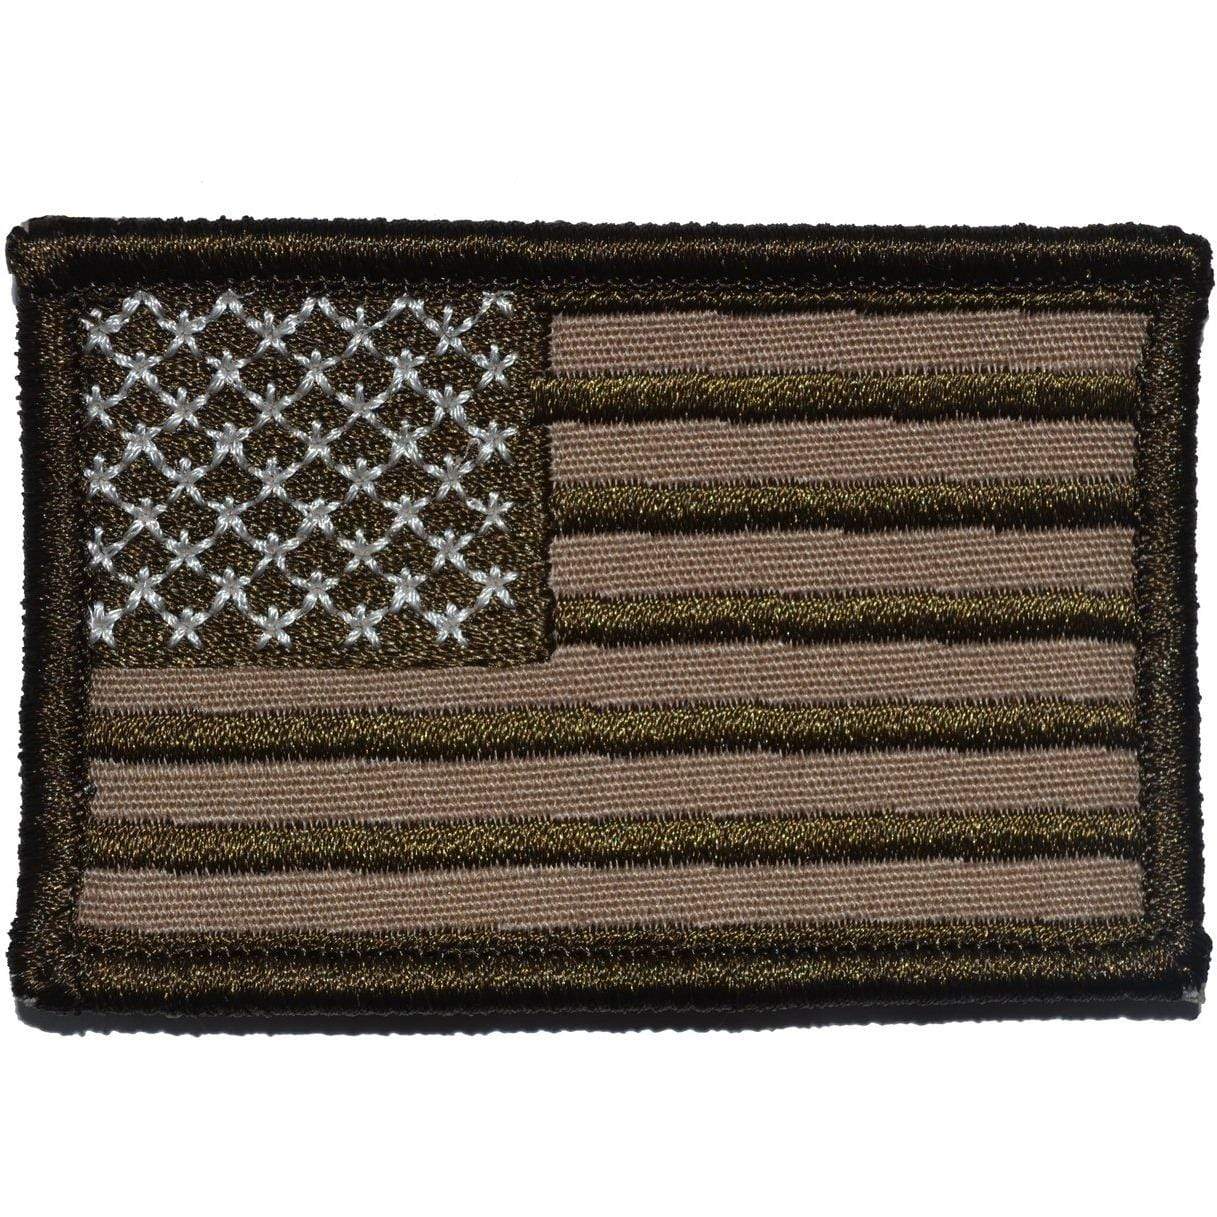 Tactical Gear Junkie Patches Left Face (Forward) Coyote Brown US Flag - 2x3 Patch